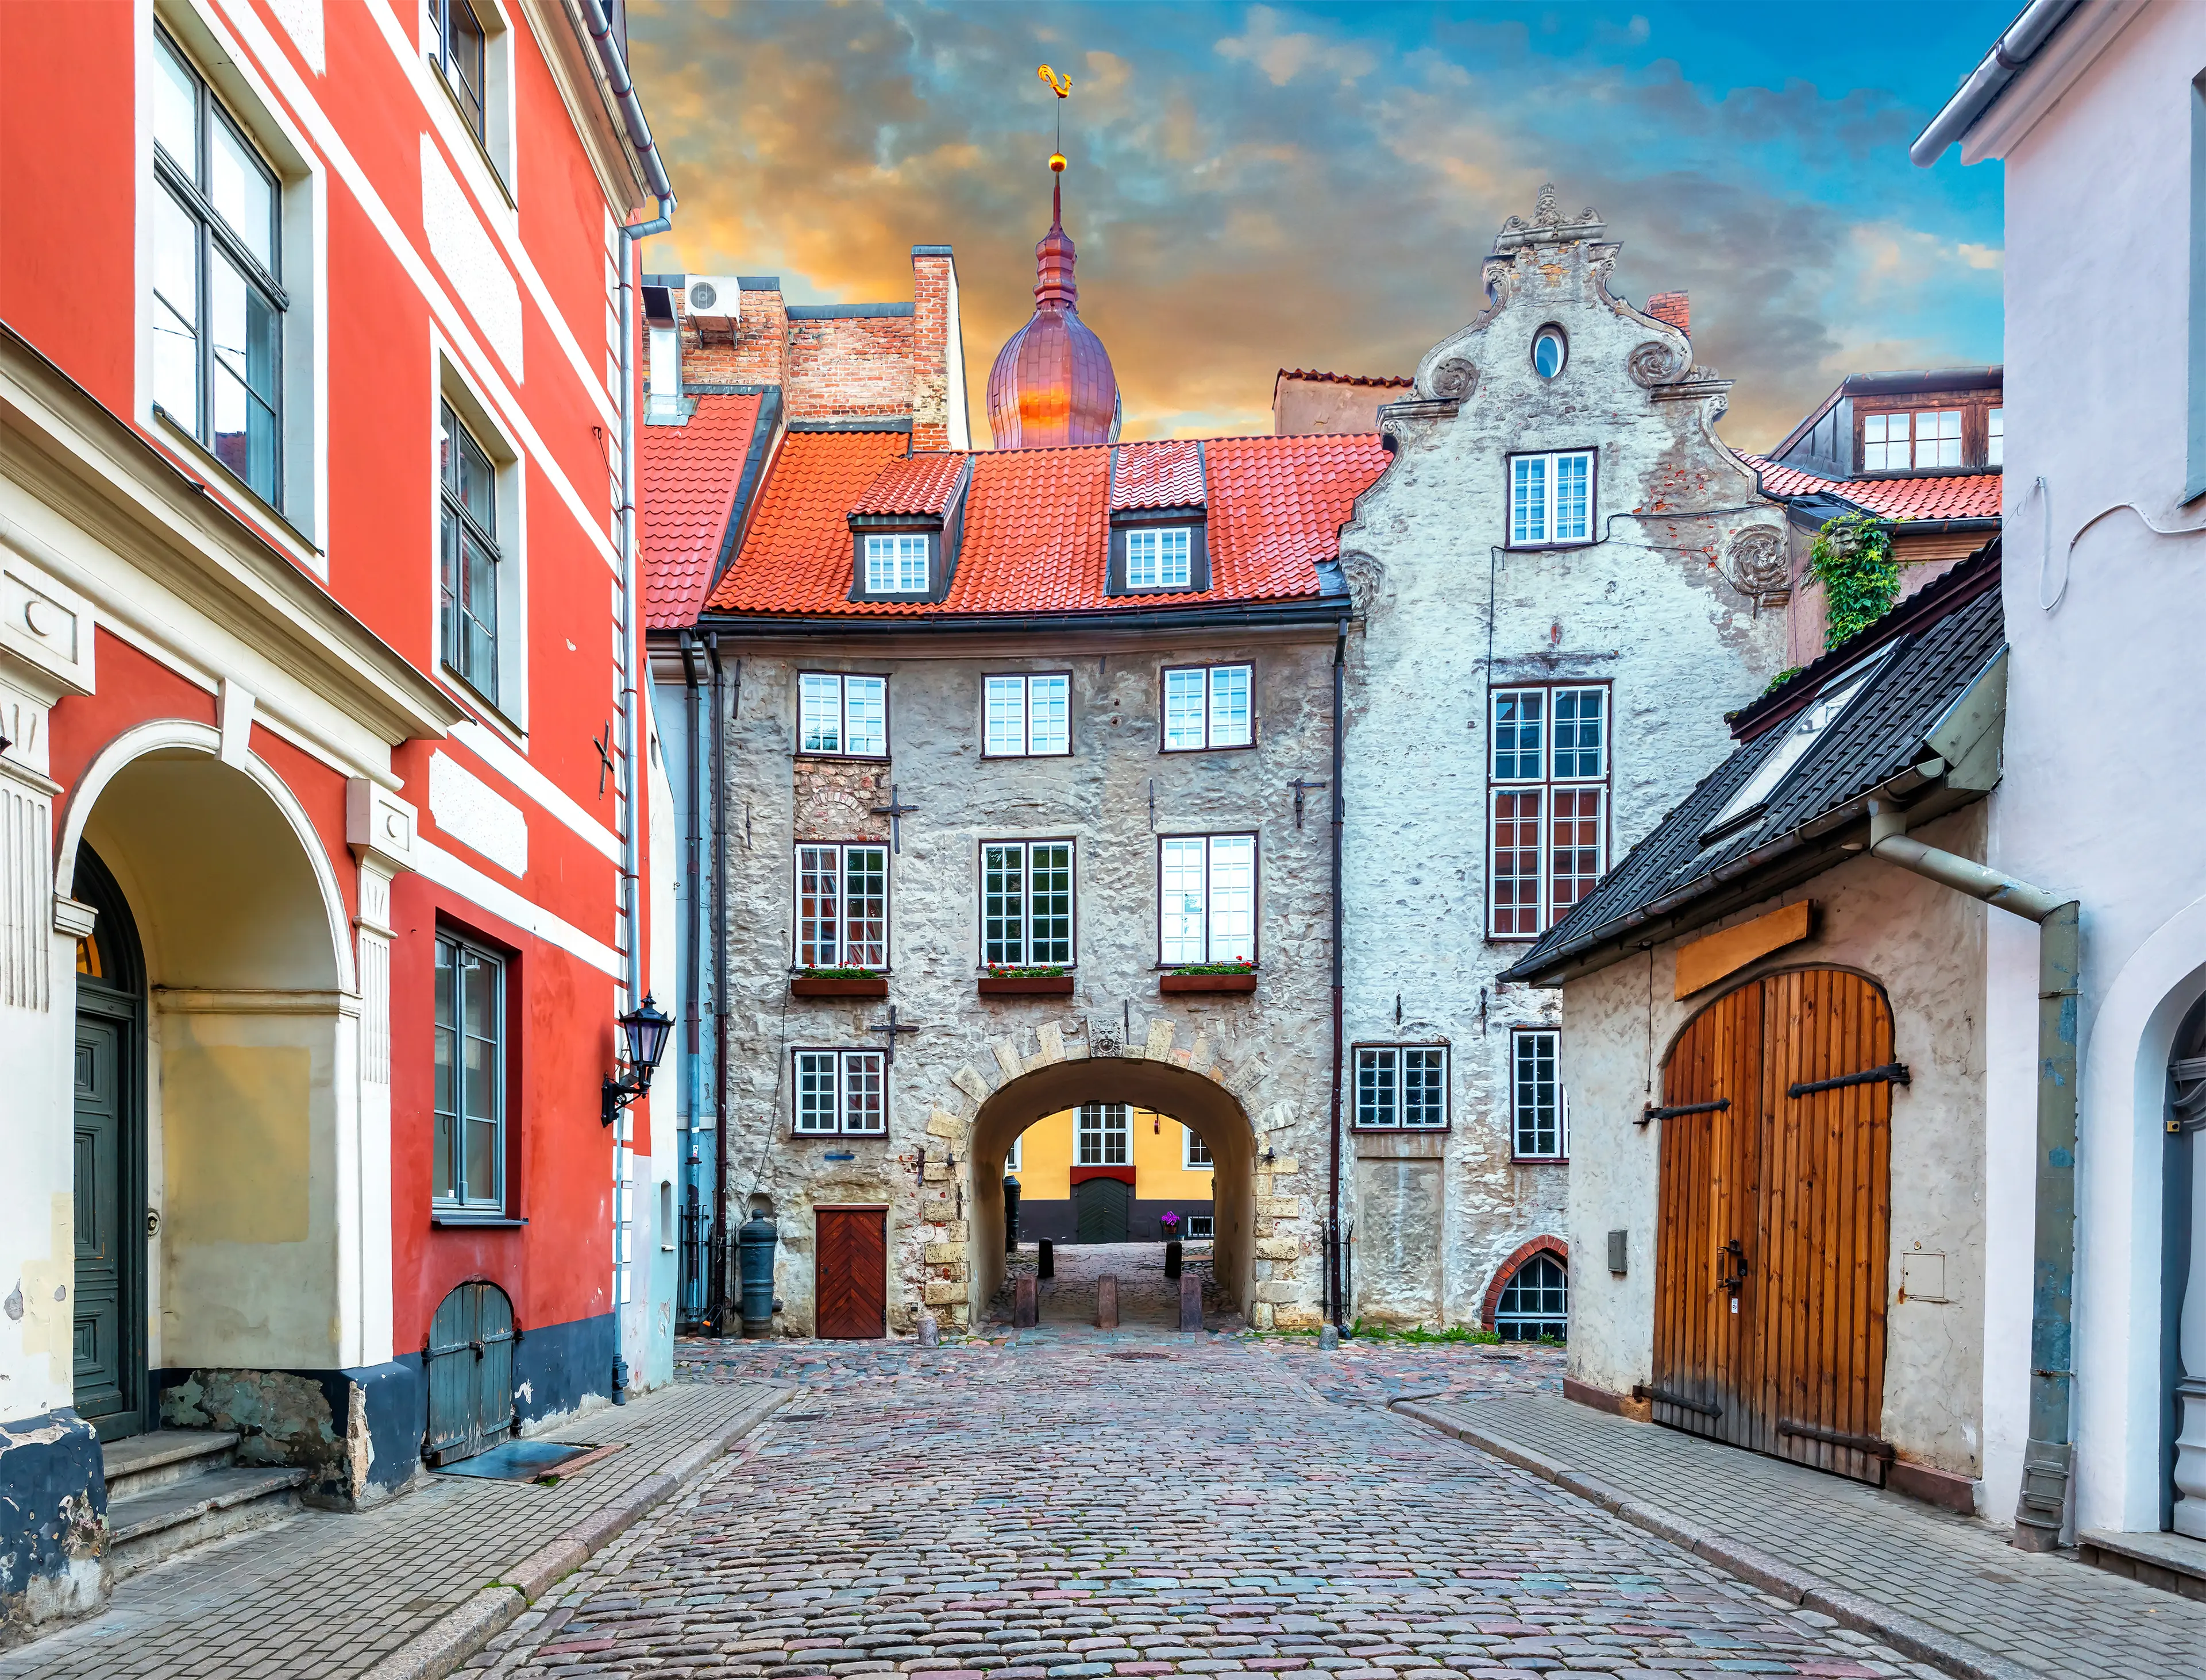 2-Day Romantic Riga Getaway: Sightseeing, Food and Wine for Couples